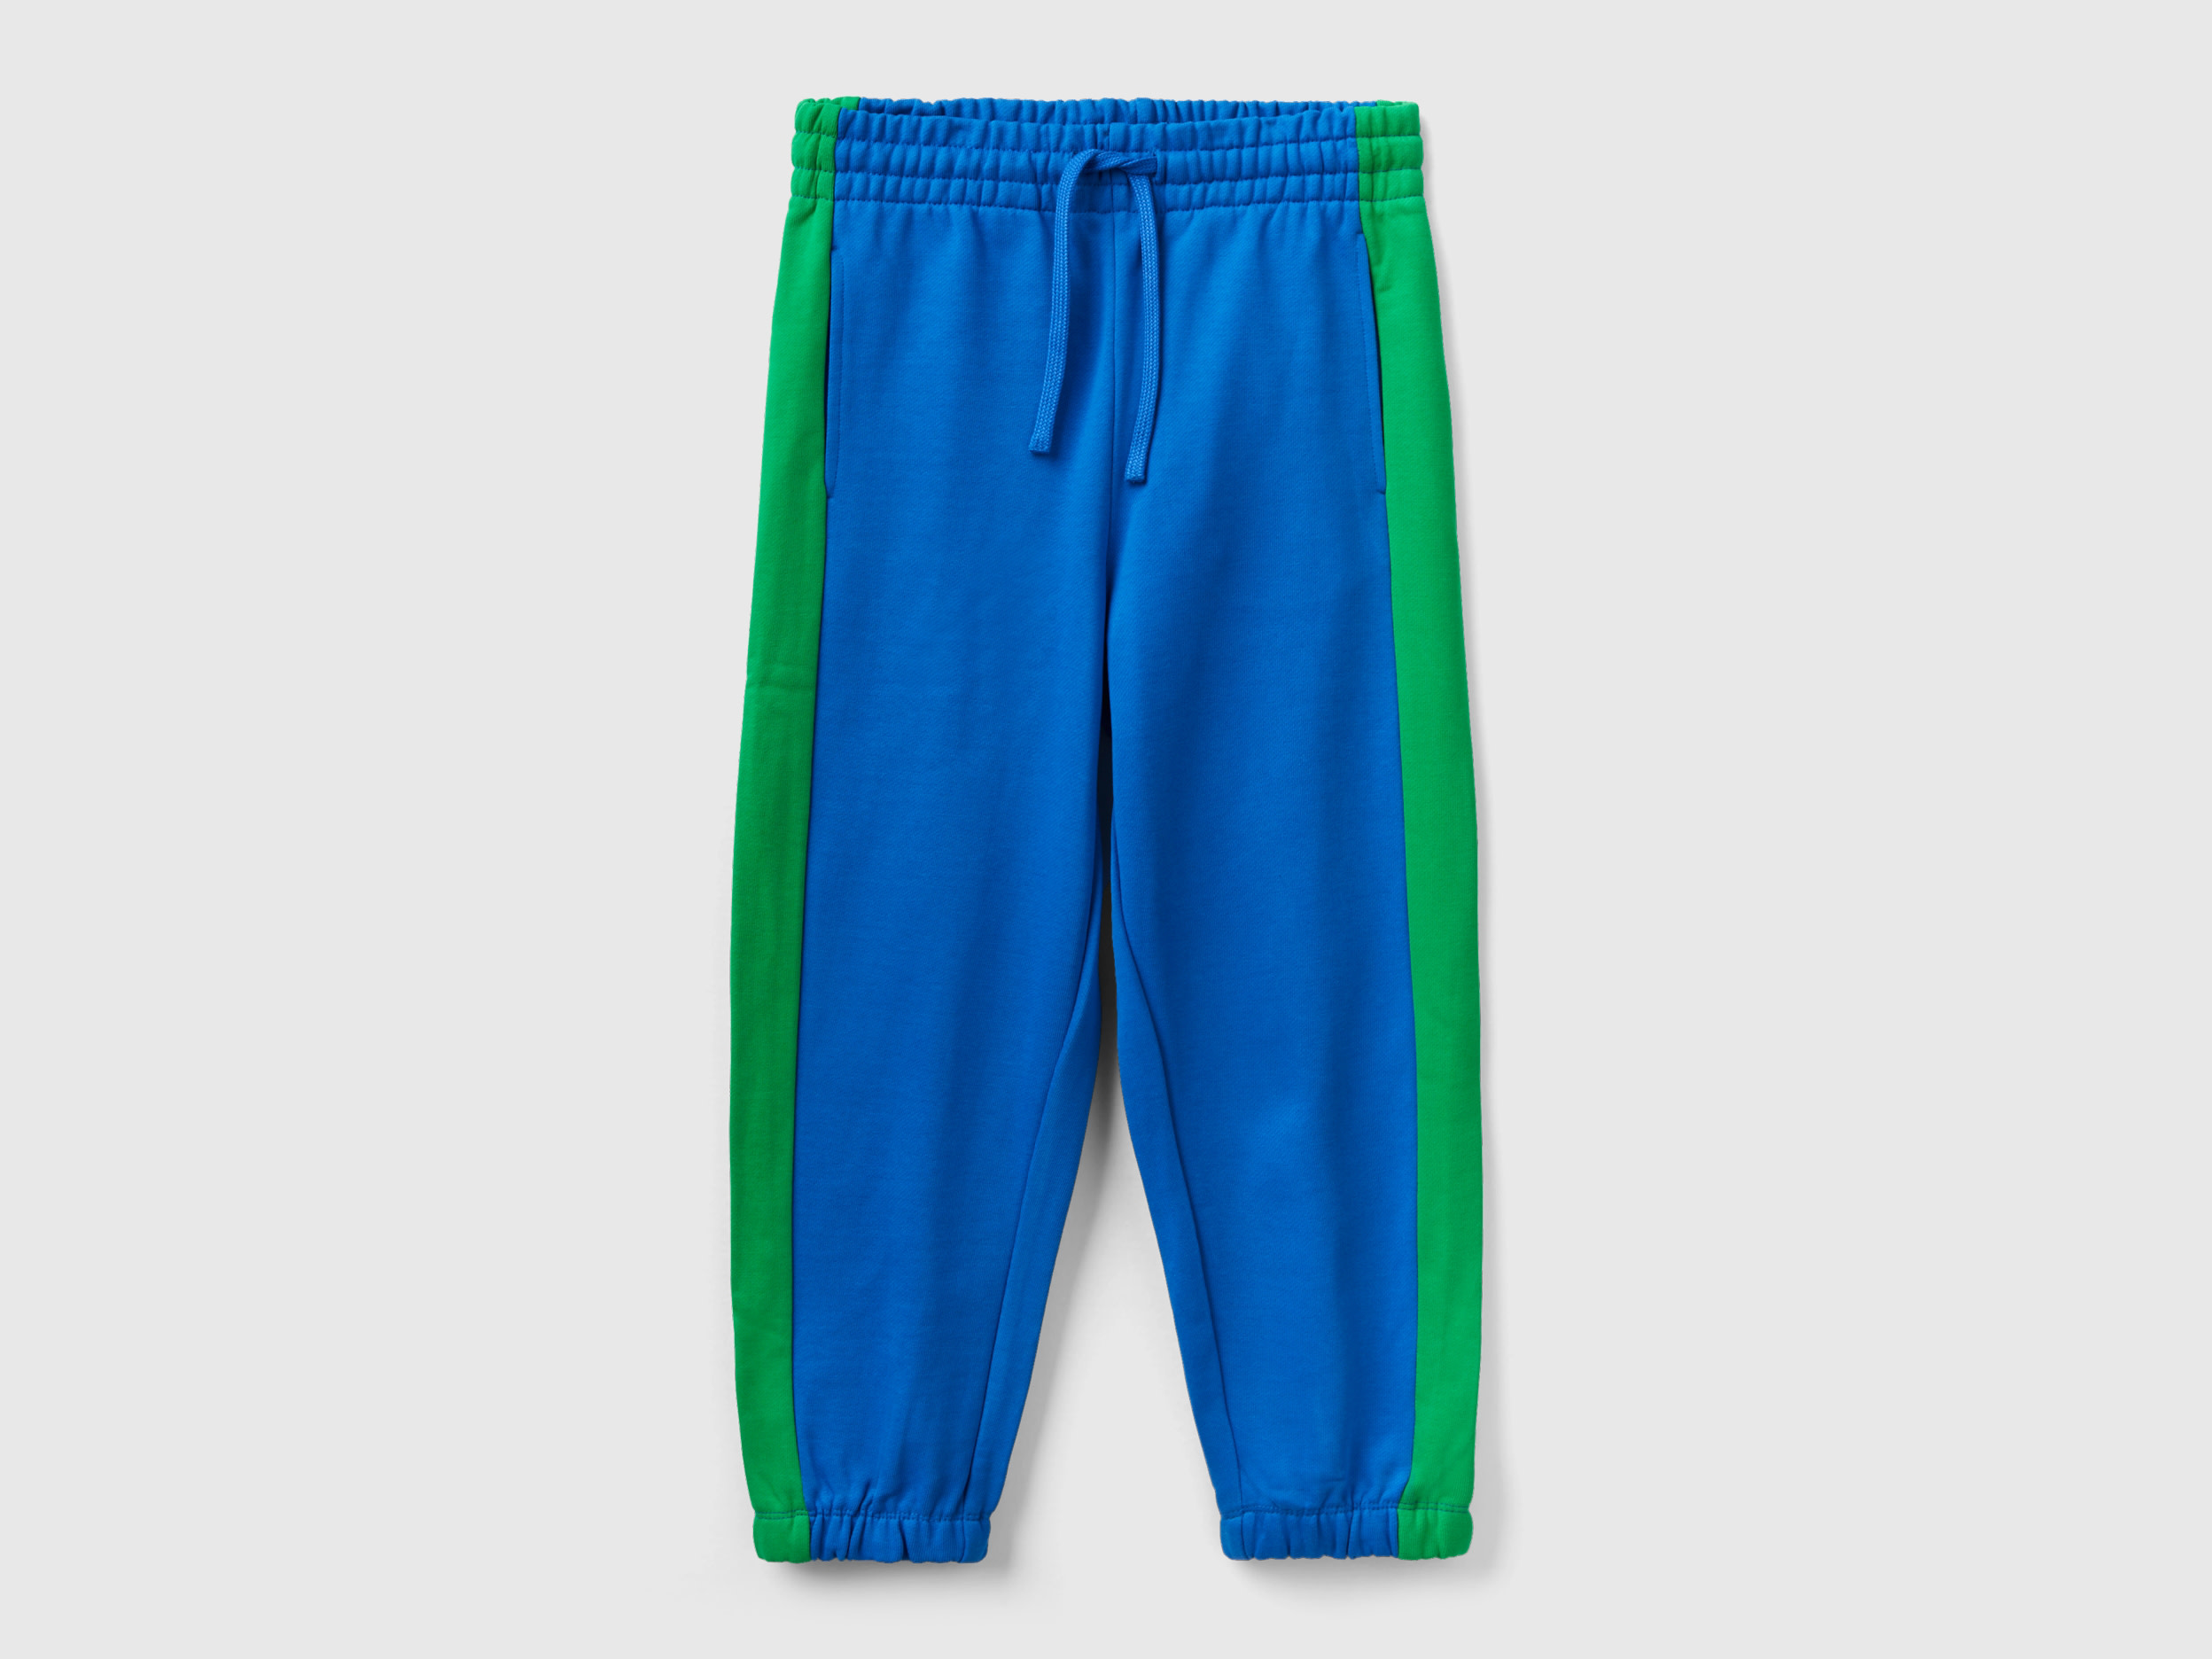 Benetton, Balloon Fit Joggers With Side Bands, size 2XL, Bright Blue, Kids